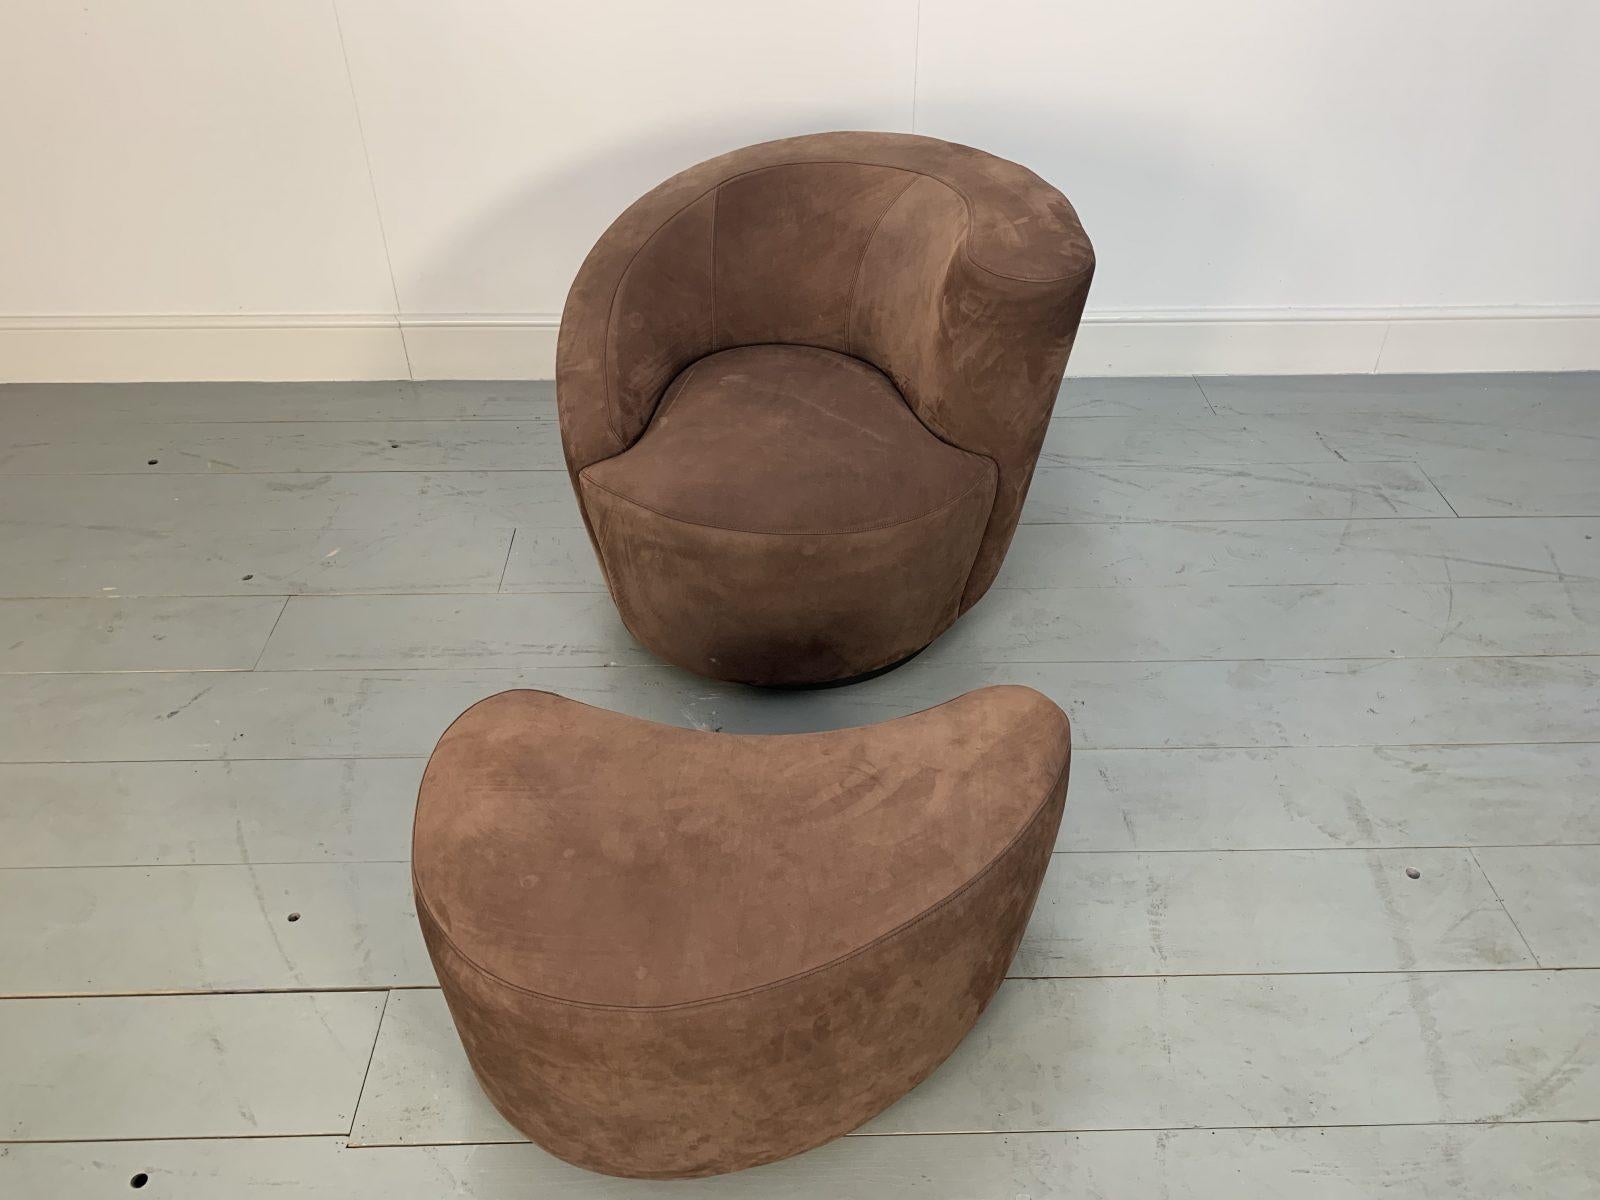 Superb Vladimir Kagan “Nautilus” Corkscrew Armchair and Footstool in Brown Ultra For Sale 5